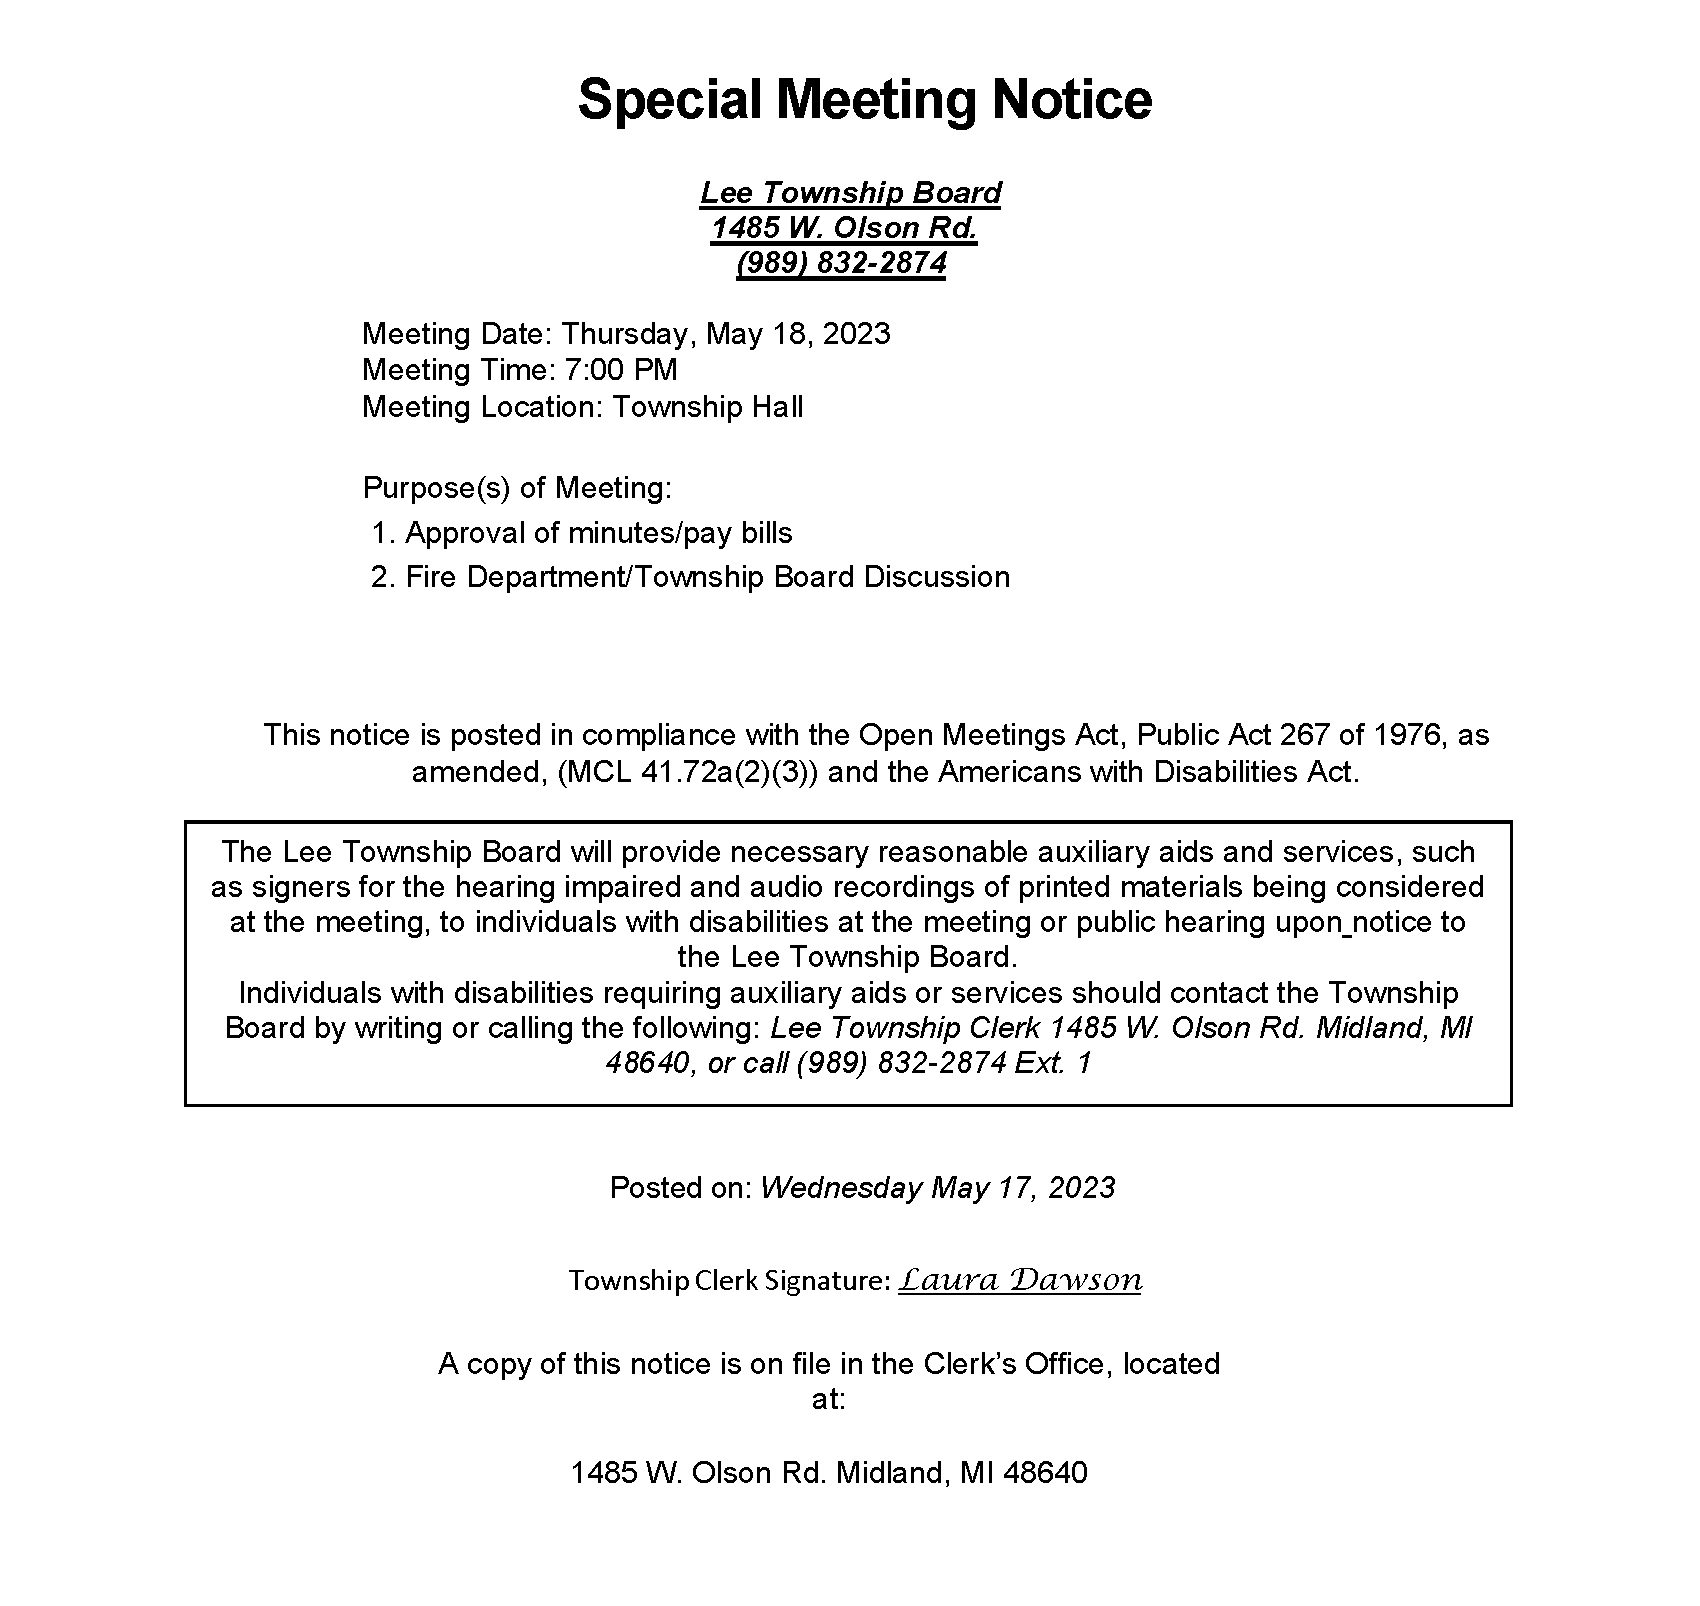 Special Meeting Notice May 18, 2023